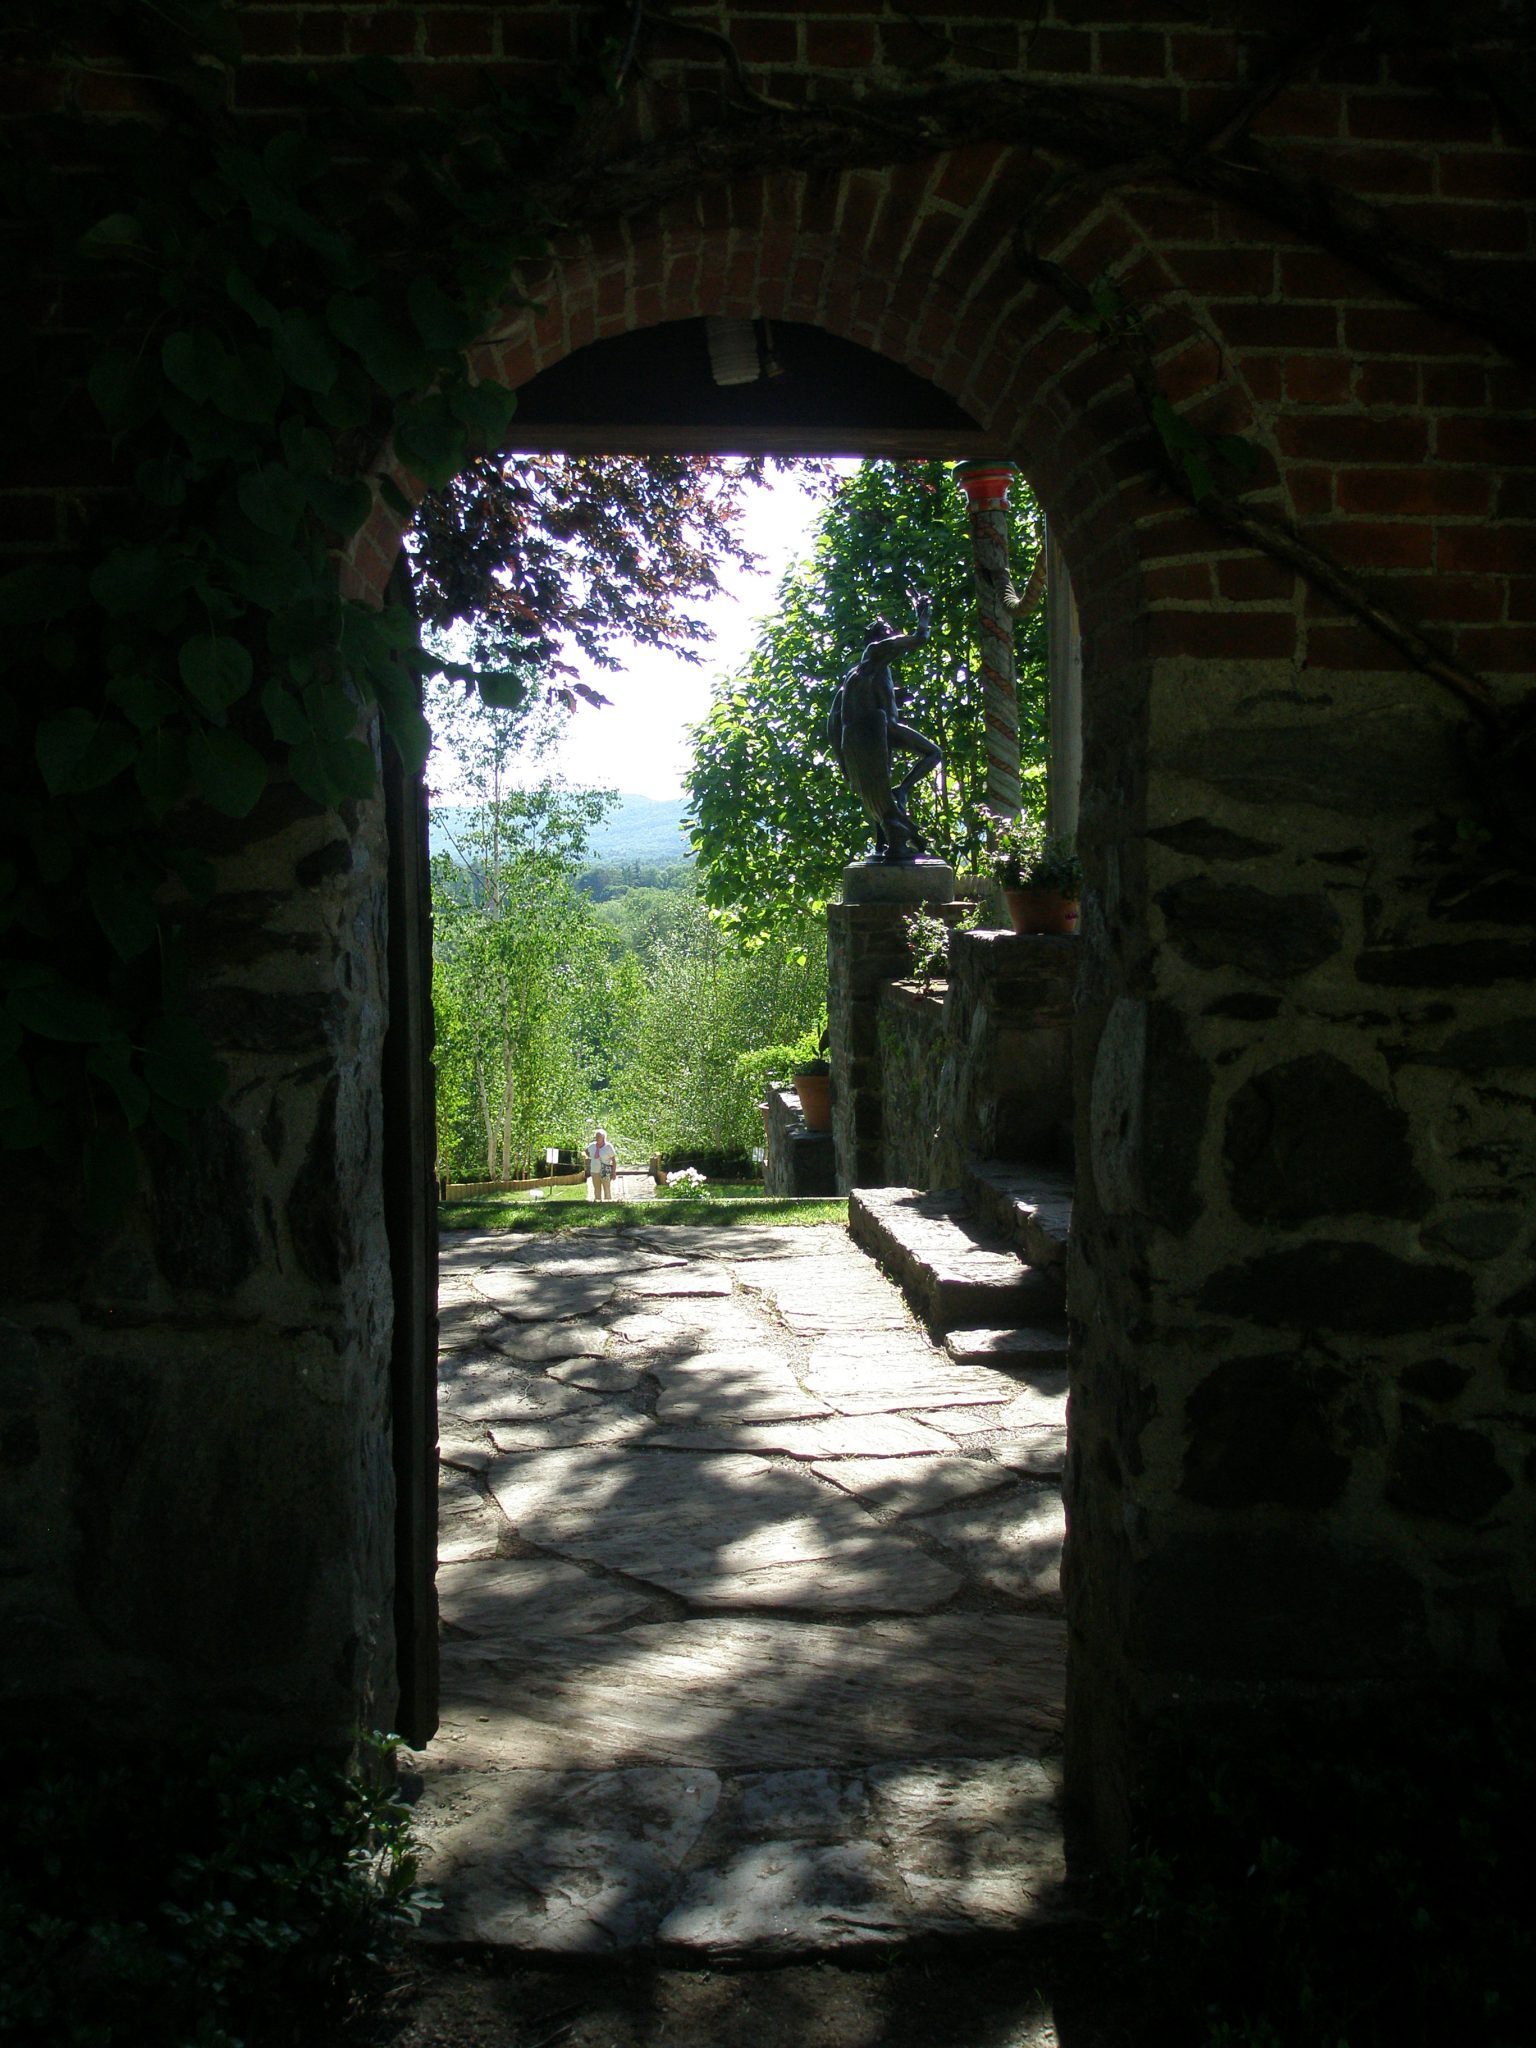 View from the the Service Court through the Gate, and down toward the Water Runnel and the Blue Steps